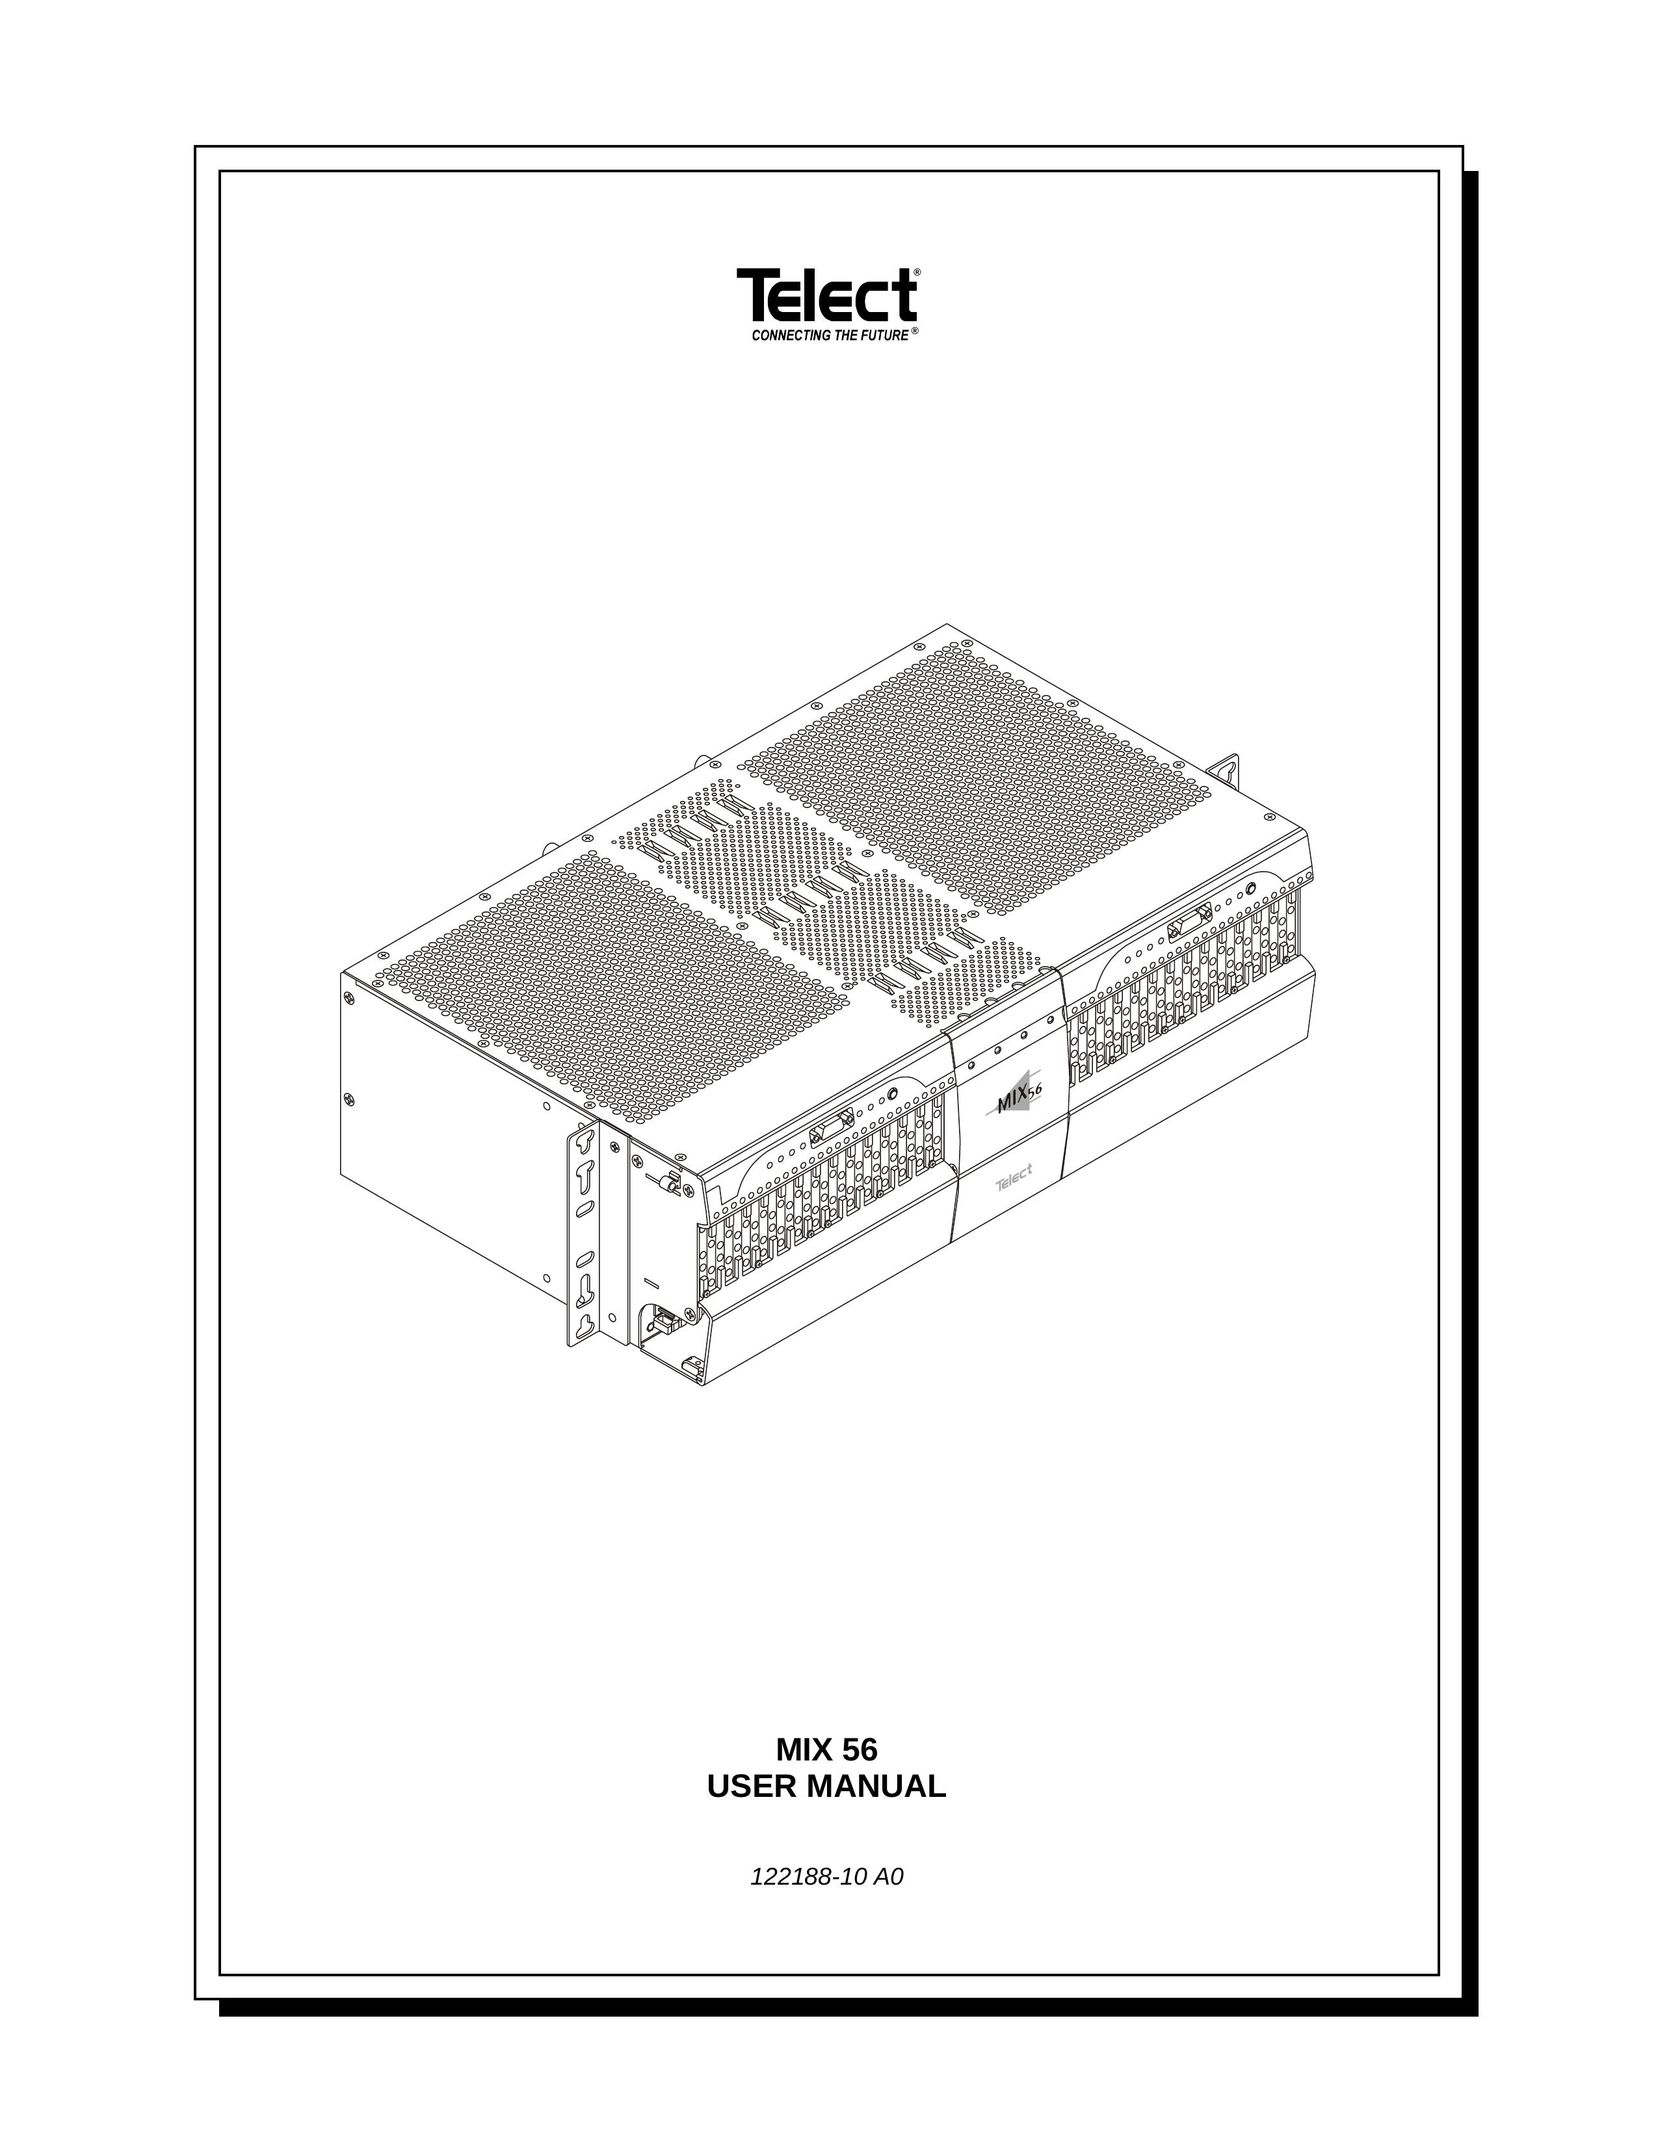 Telect MIX 56 Network Card User Manual